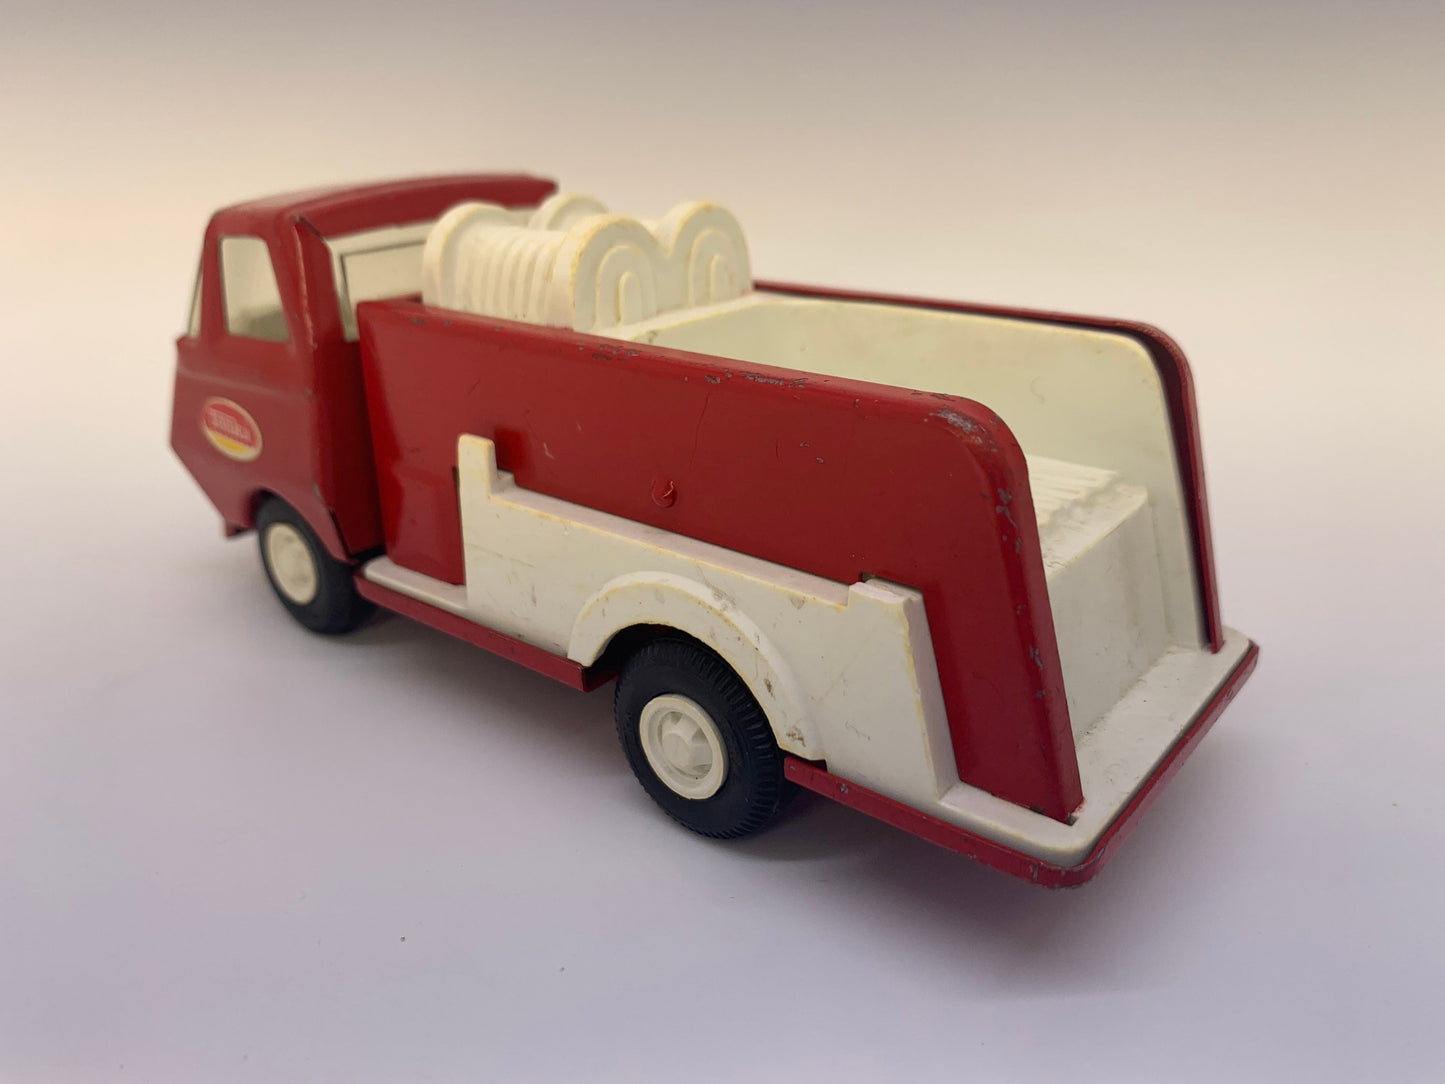 Tonka Pumper Truck Red Collectable Miniature Scale Model Toy Car Perfect Birthday Gift